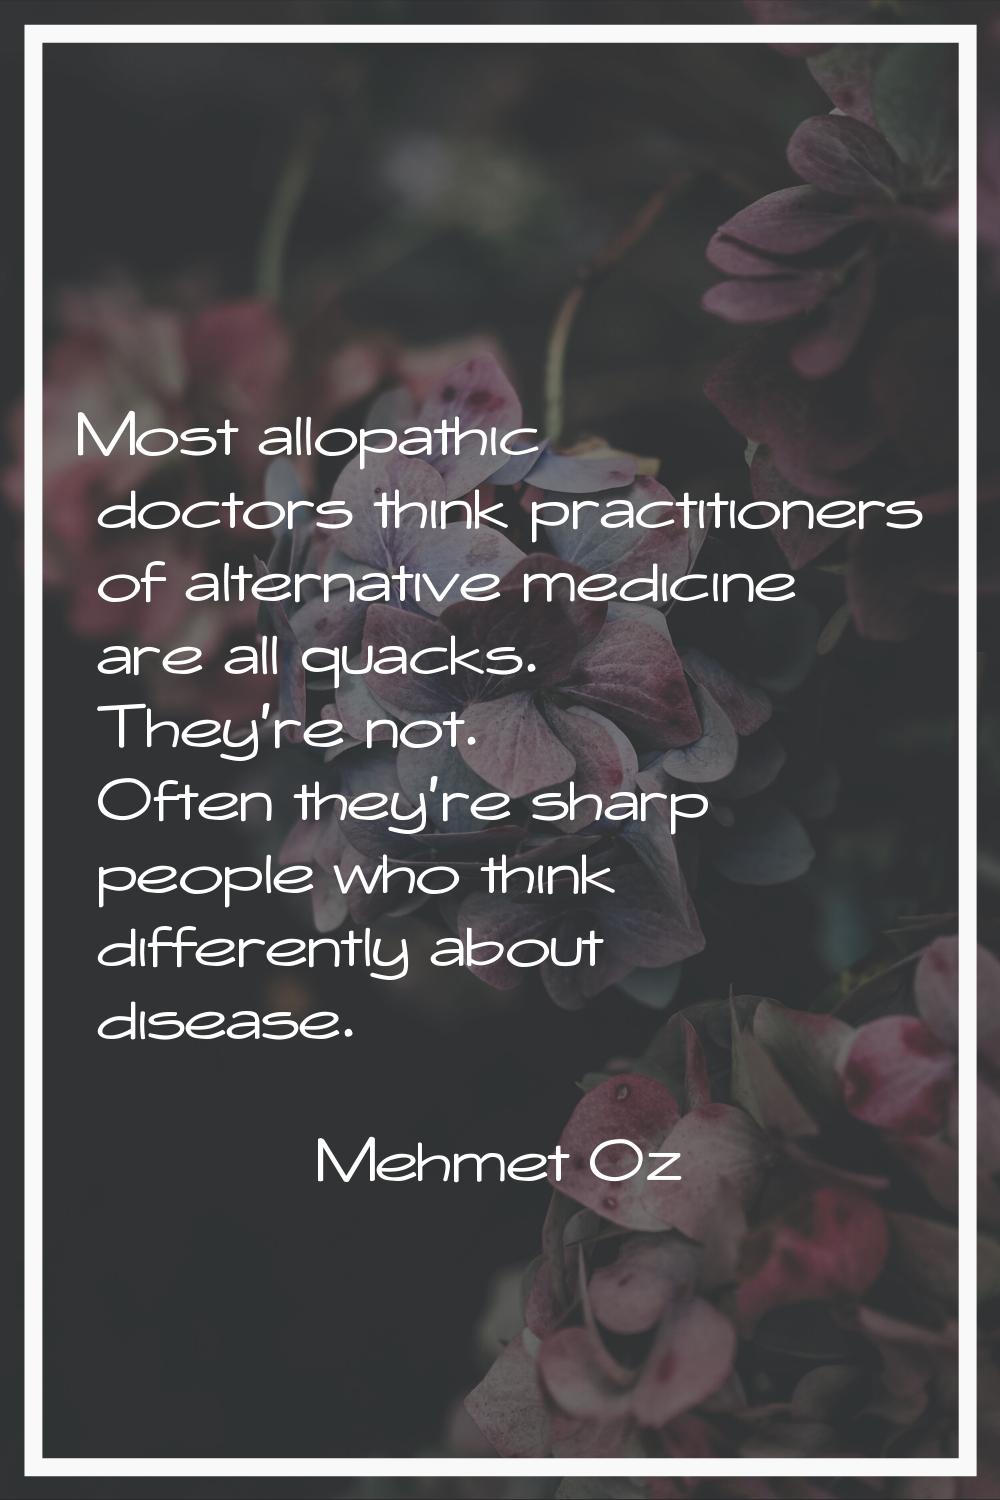 Most allopathic doctors think practitioners of alternative medicine are all quacks. They're not. Of